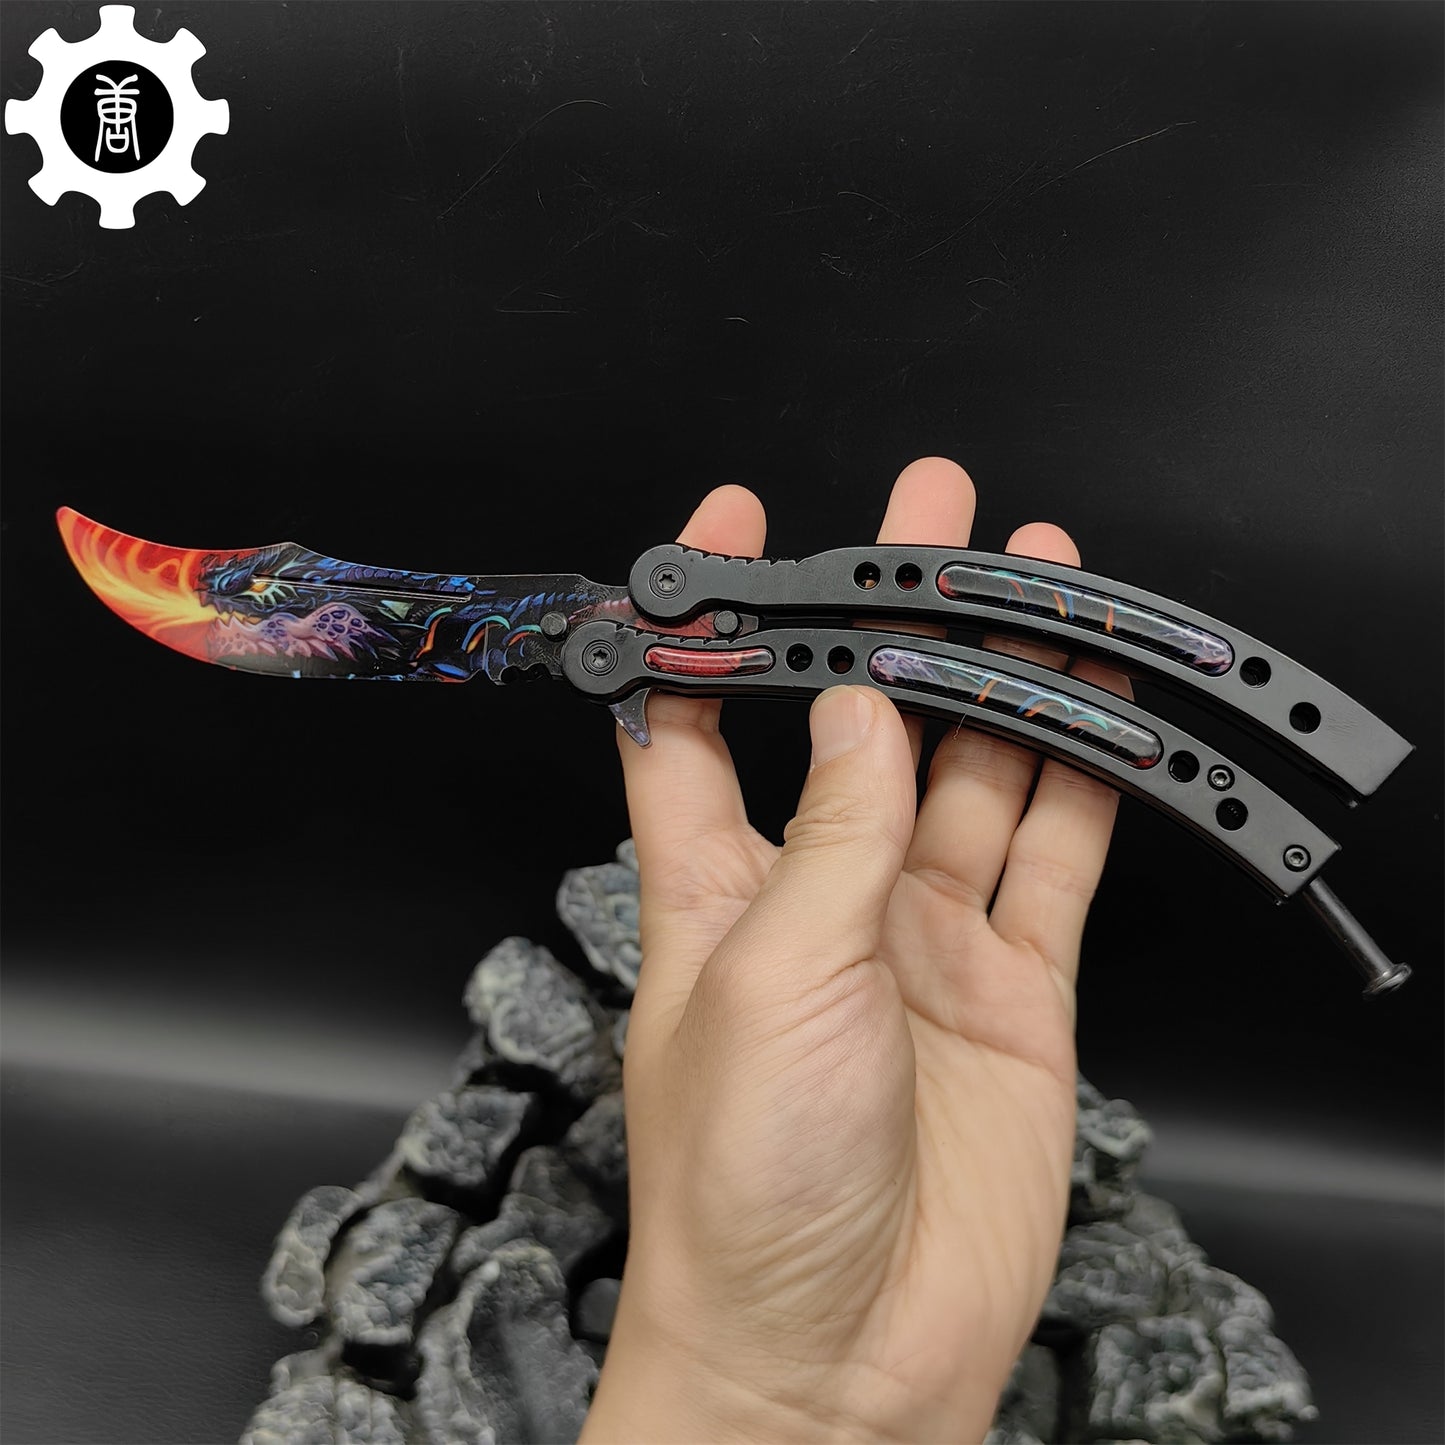 Game Butterfly Knife Dragonfire Pattern Metal Balisong Trainer